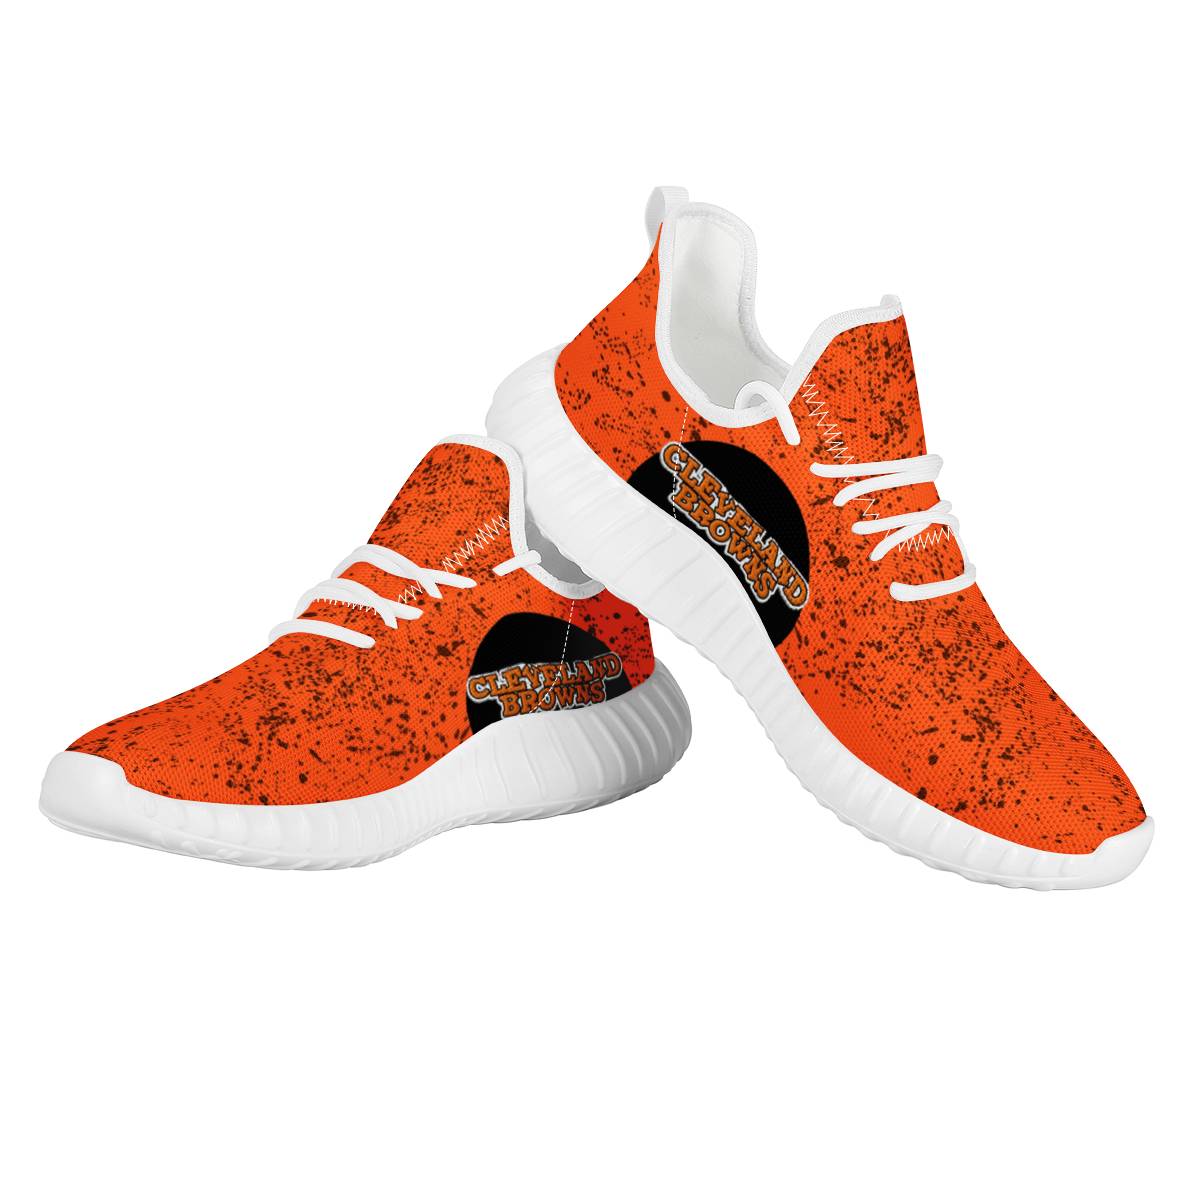 Men's Cleveland Browns Mesh Knit Sneakers/Shoes 002